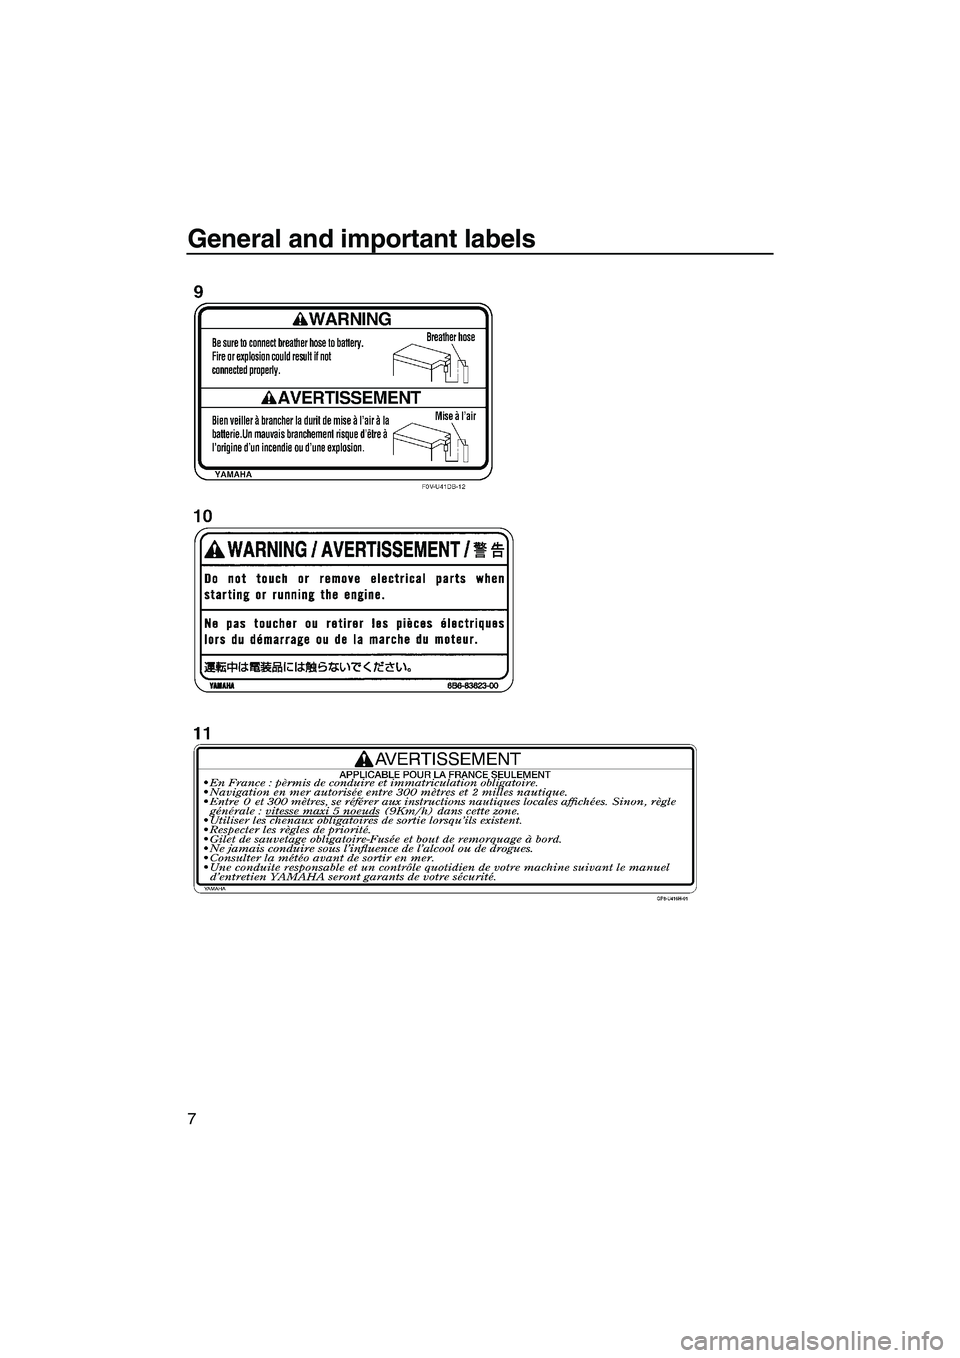 YAMAHA SVHO 2009 User Guide General and important labels
7
UF1W71E0.book  Page 7  Tuesday, June 24, 2008  11:46 AM 